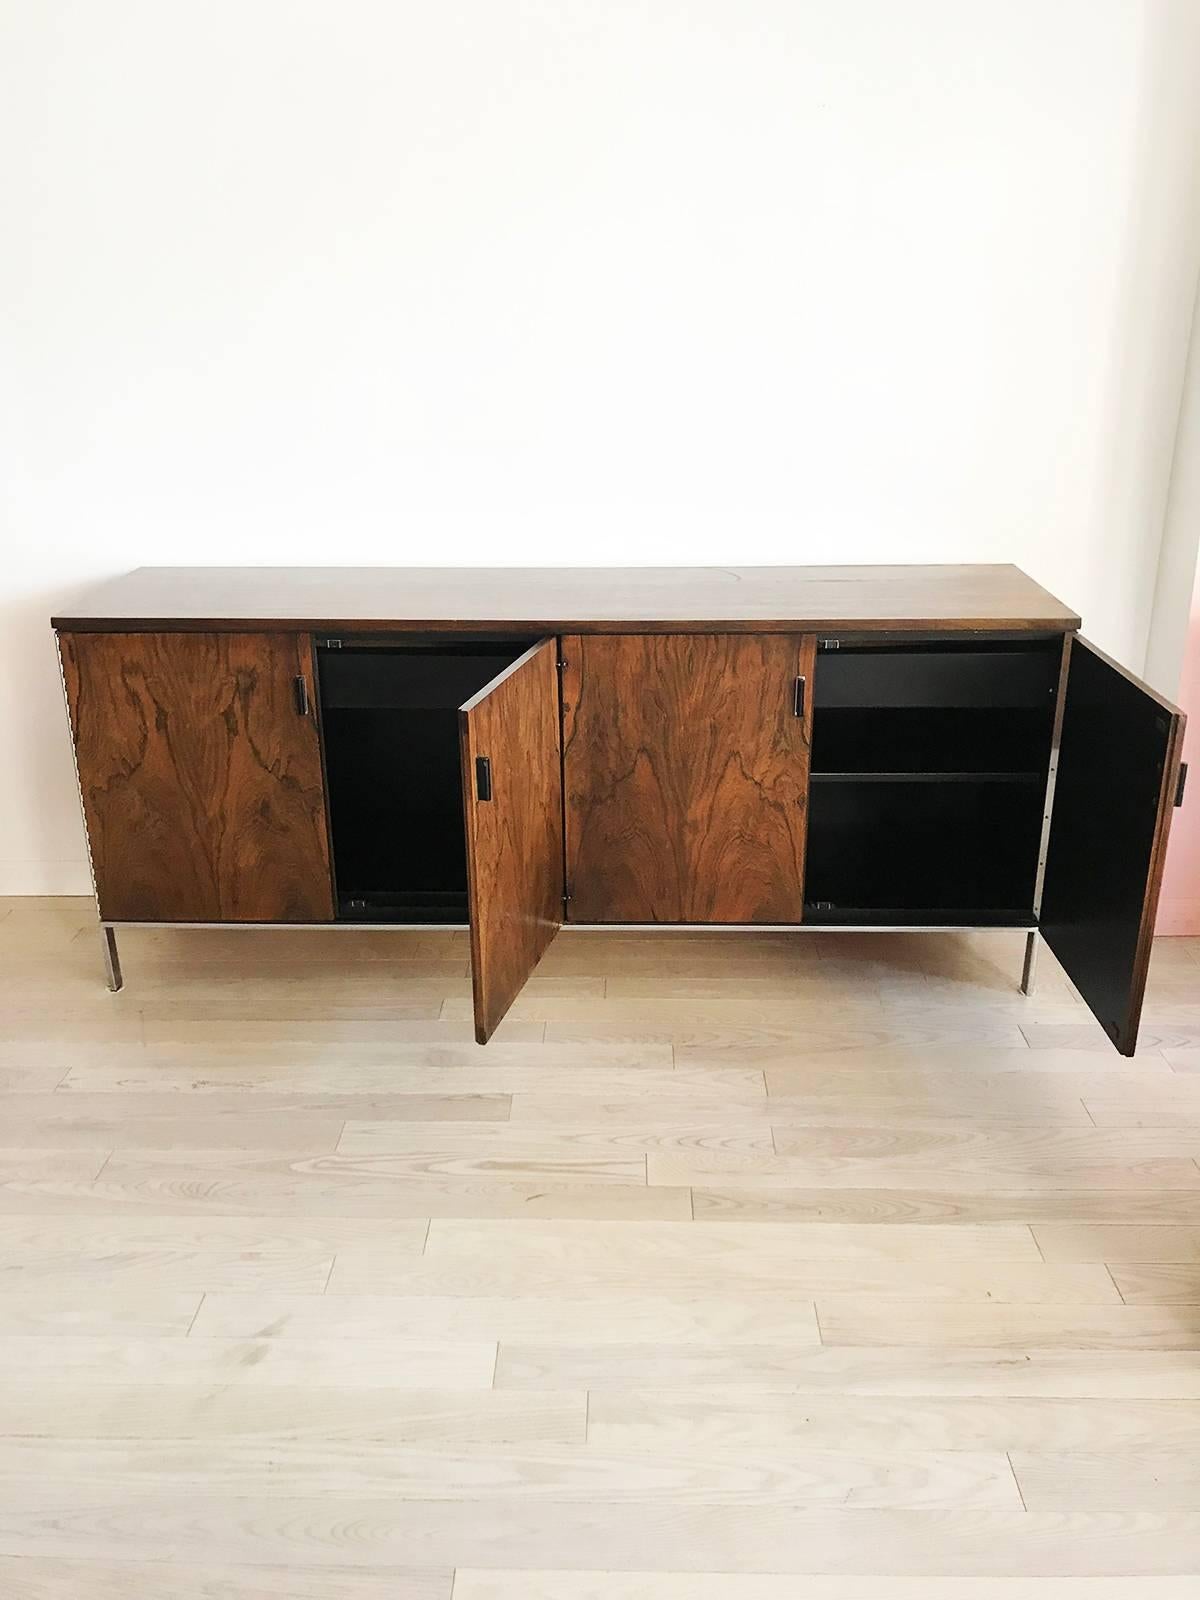 Beautiful rosewood server. Chrome legs. Large and very sturdy. Double cabinets with top drawer and adjustable shelve. Black formica insides. Minor patina on chrome. Beautiful rosewood grain. Some veneer chipping from age at bottom, pictured. Really